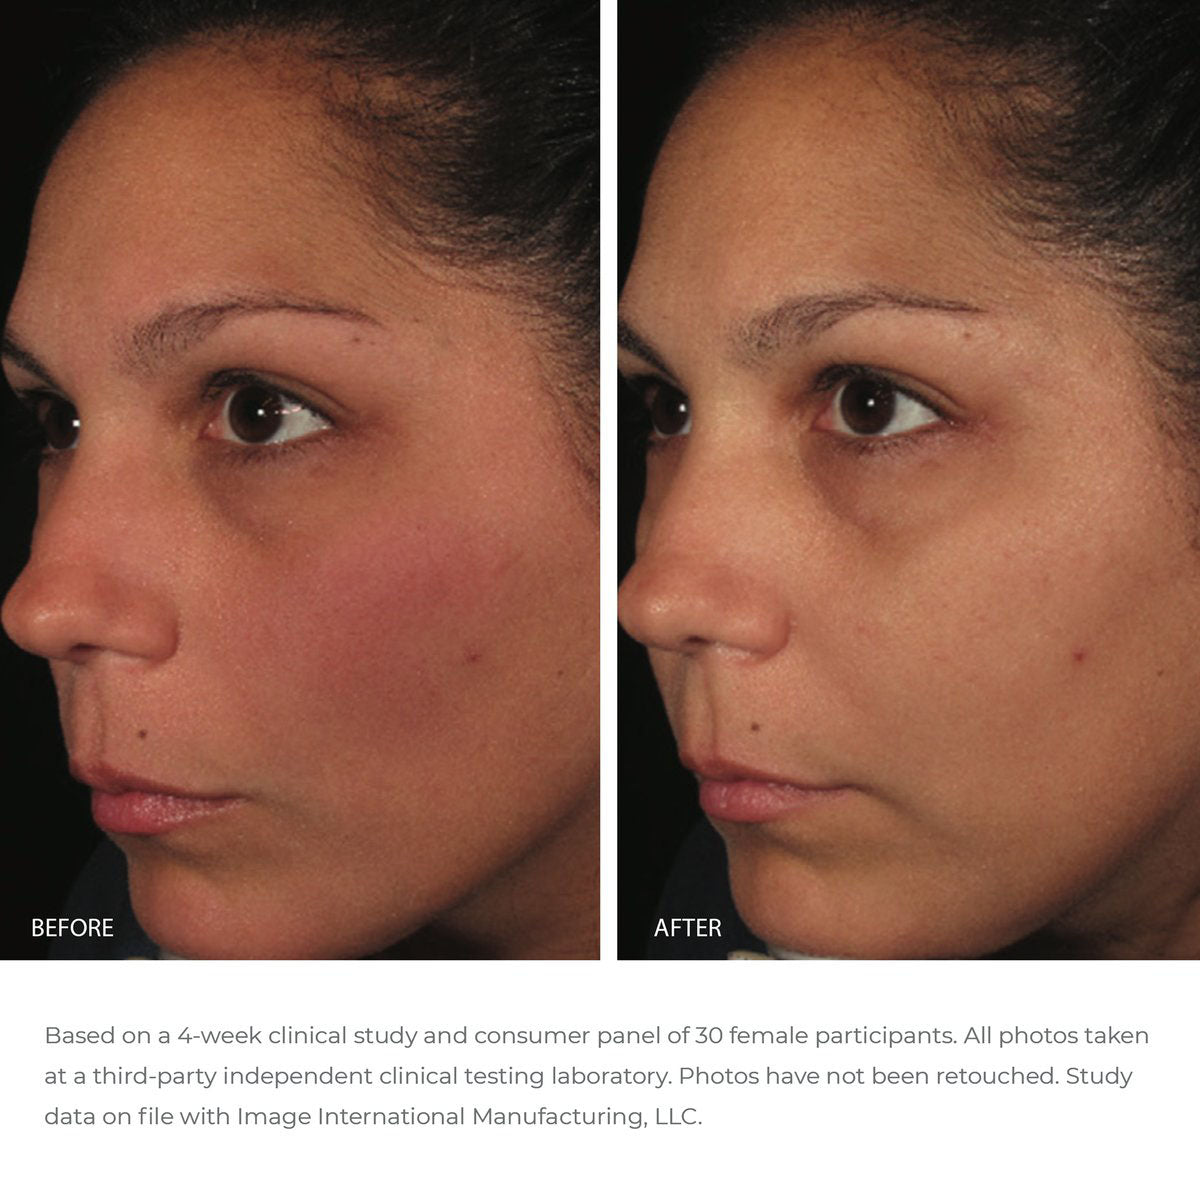 Before and after pictures of the results of the ORMEDIC antioxidant serum.